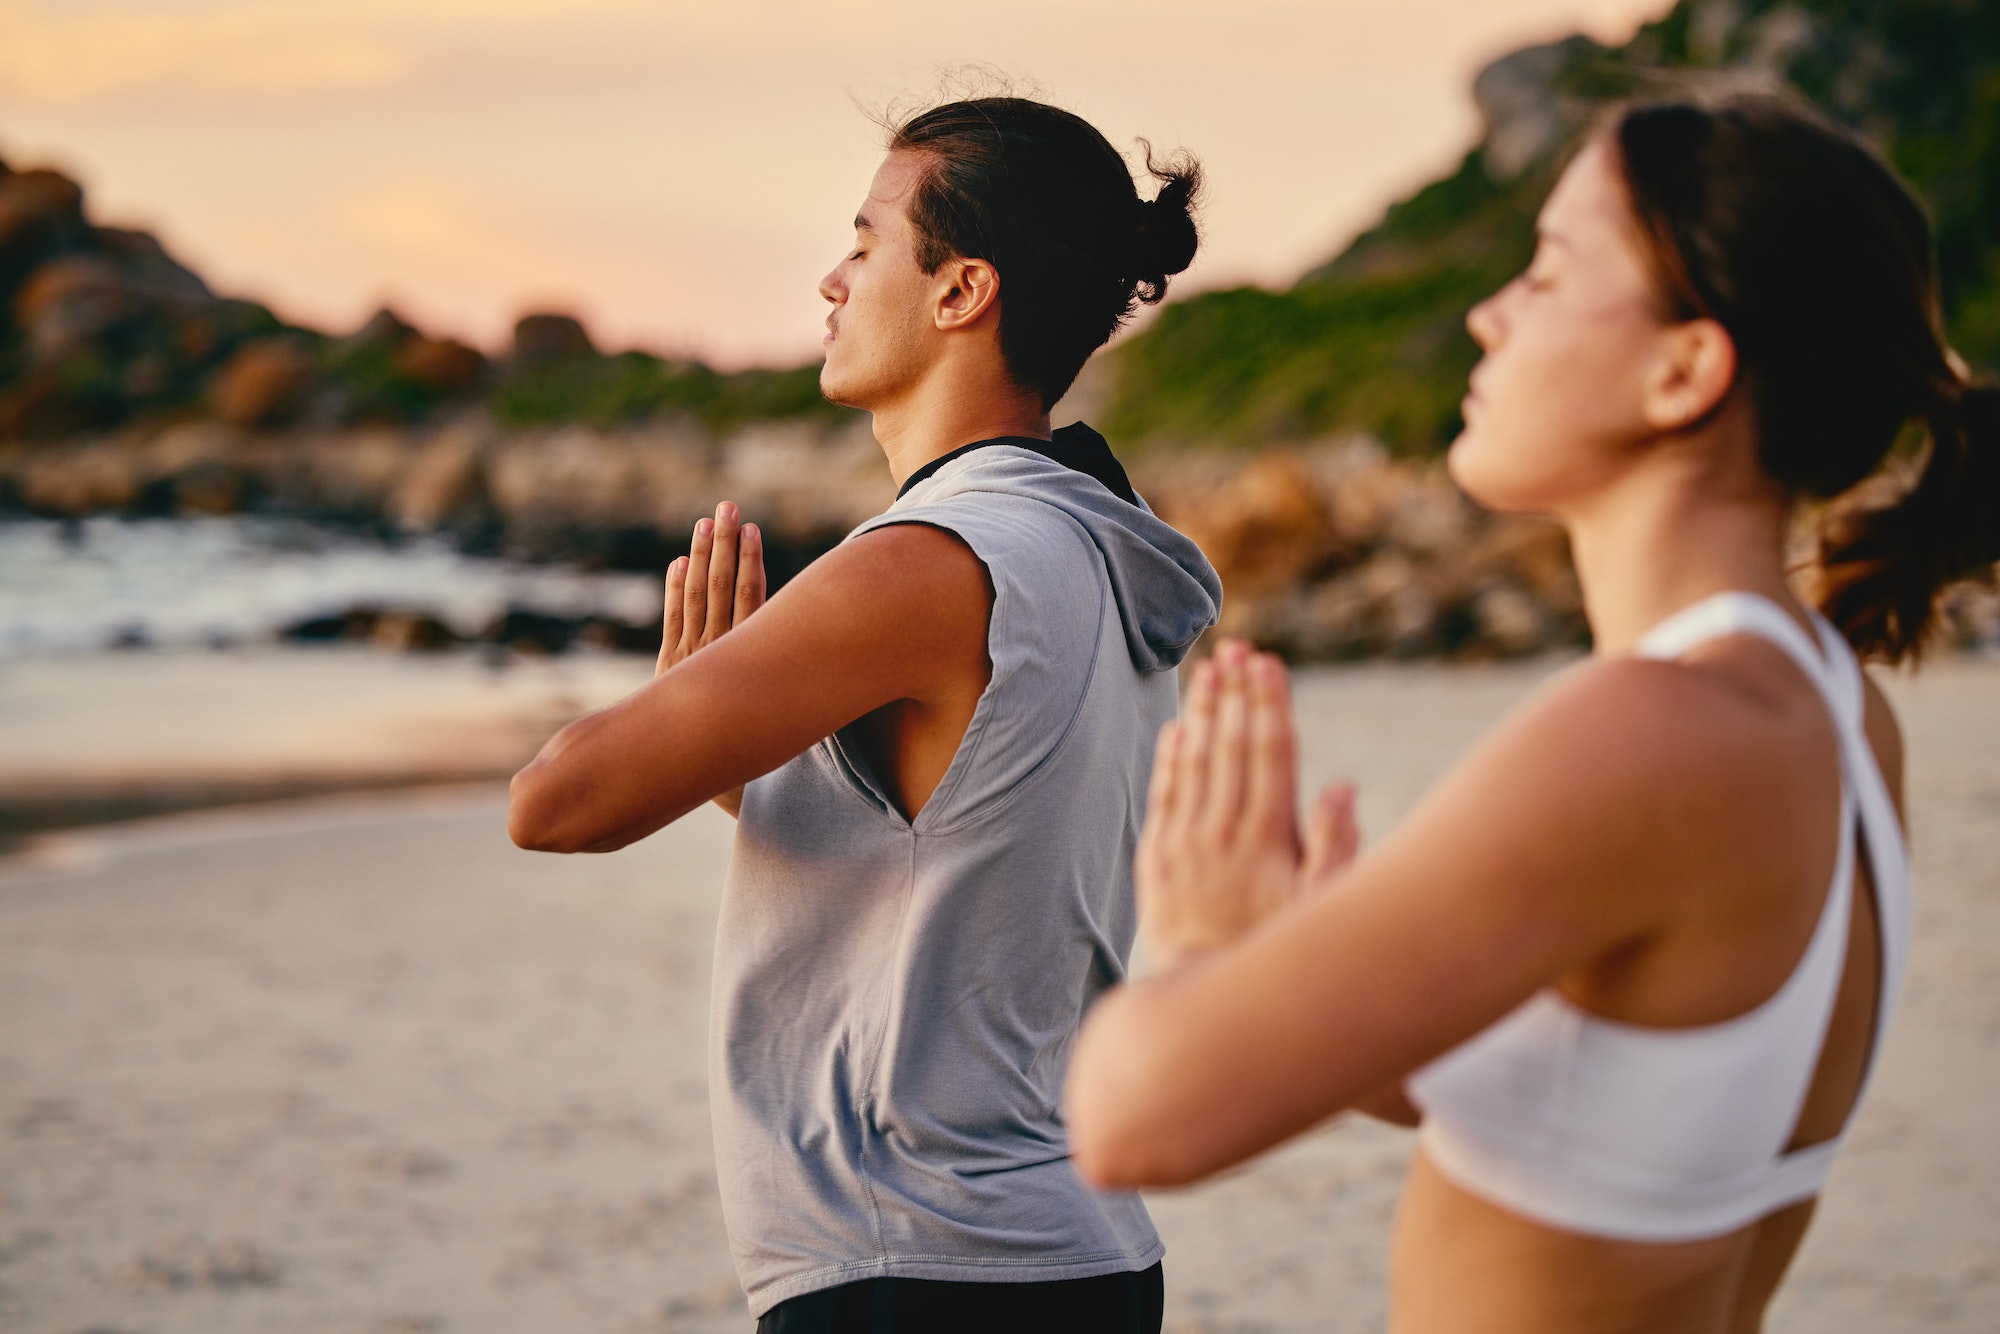 Couple, prayer hands and yoga meditation at beach outdoors for health and wellness. Sunset, pilates